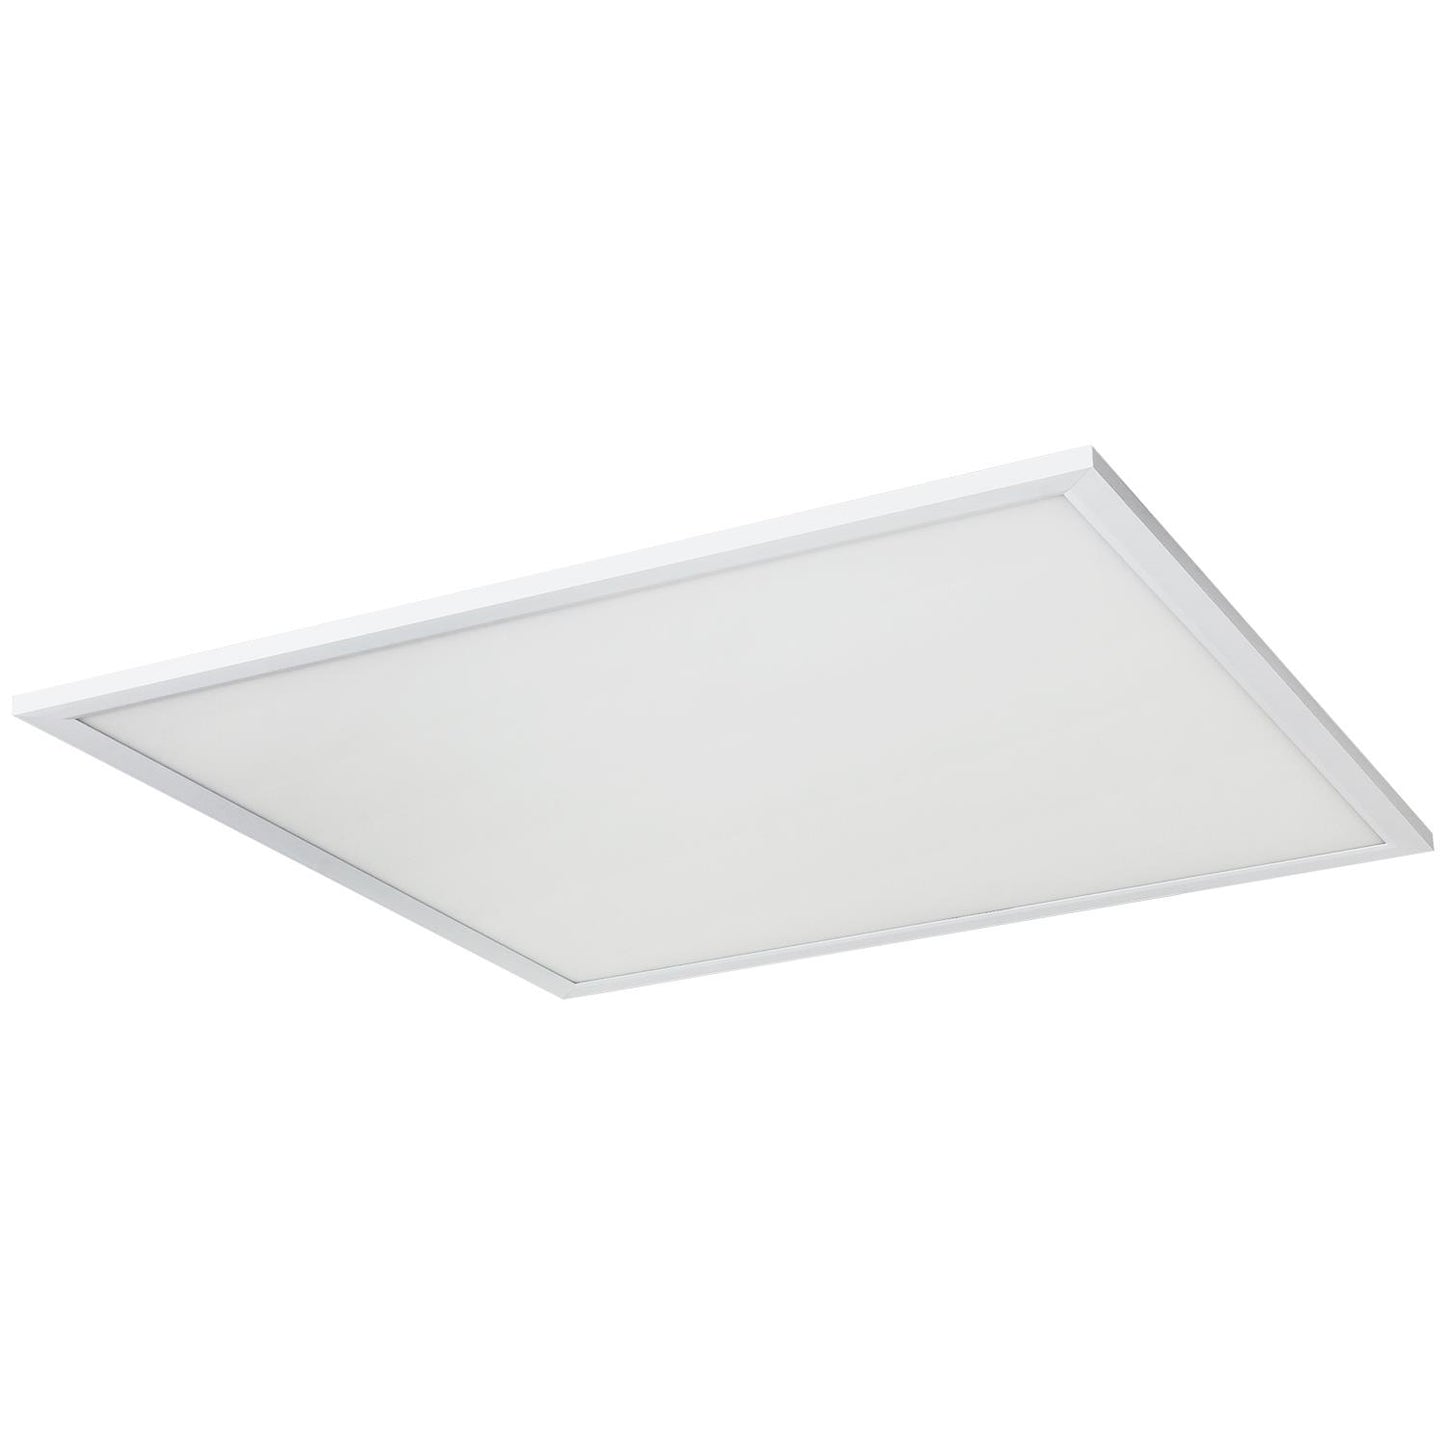 2-Pack Sunlite 2x2 Foot LED Lay-in Light Panel Fixtures, Color Tunable (35K/40K/50K), Power Tunable (20W/30W/40W), 120/277 Volt, Dimmable, White Finish, 50,000 Hour Life Span, ETL & DLC Listed